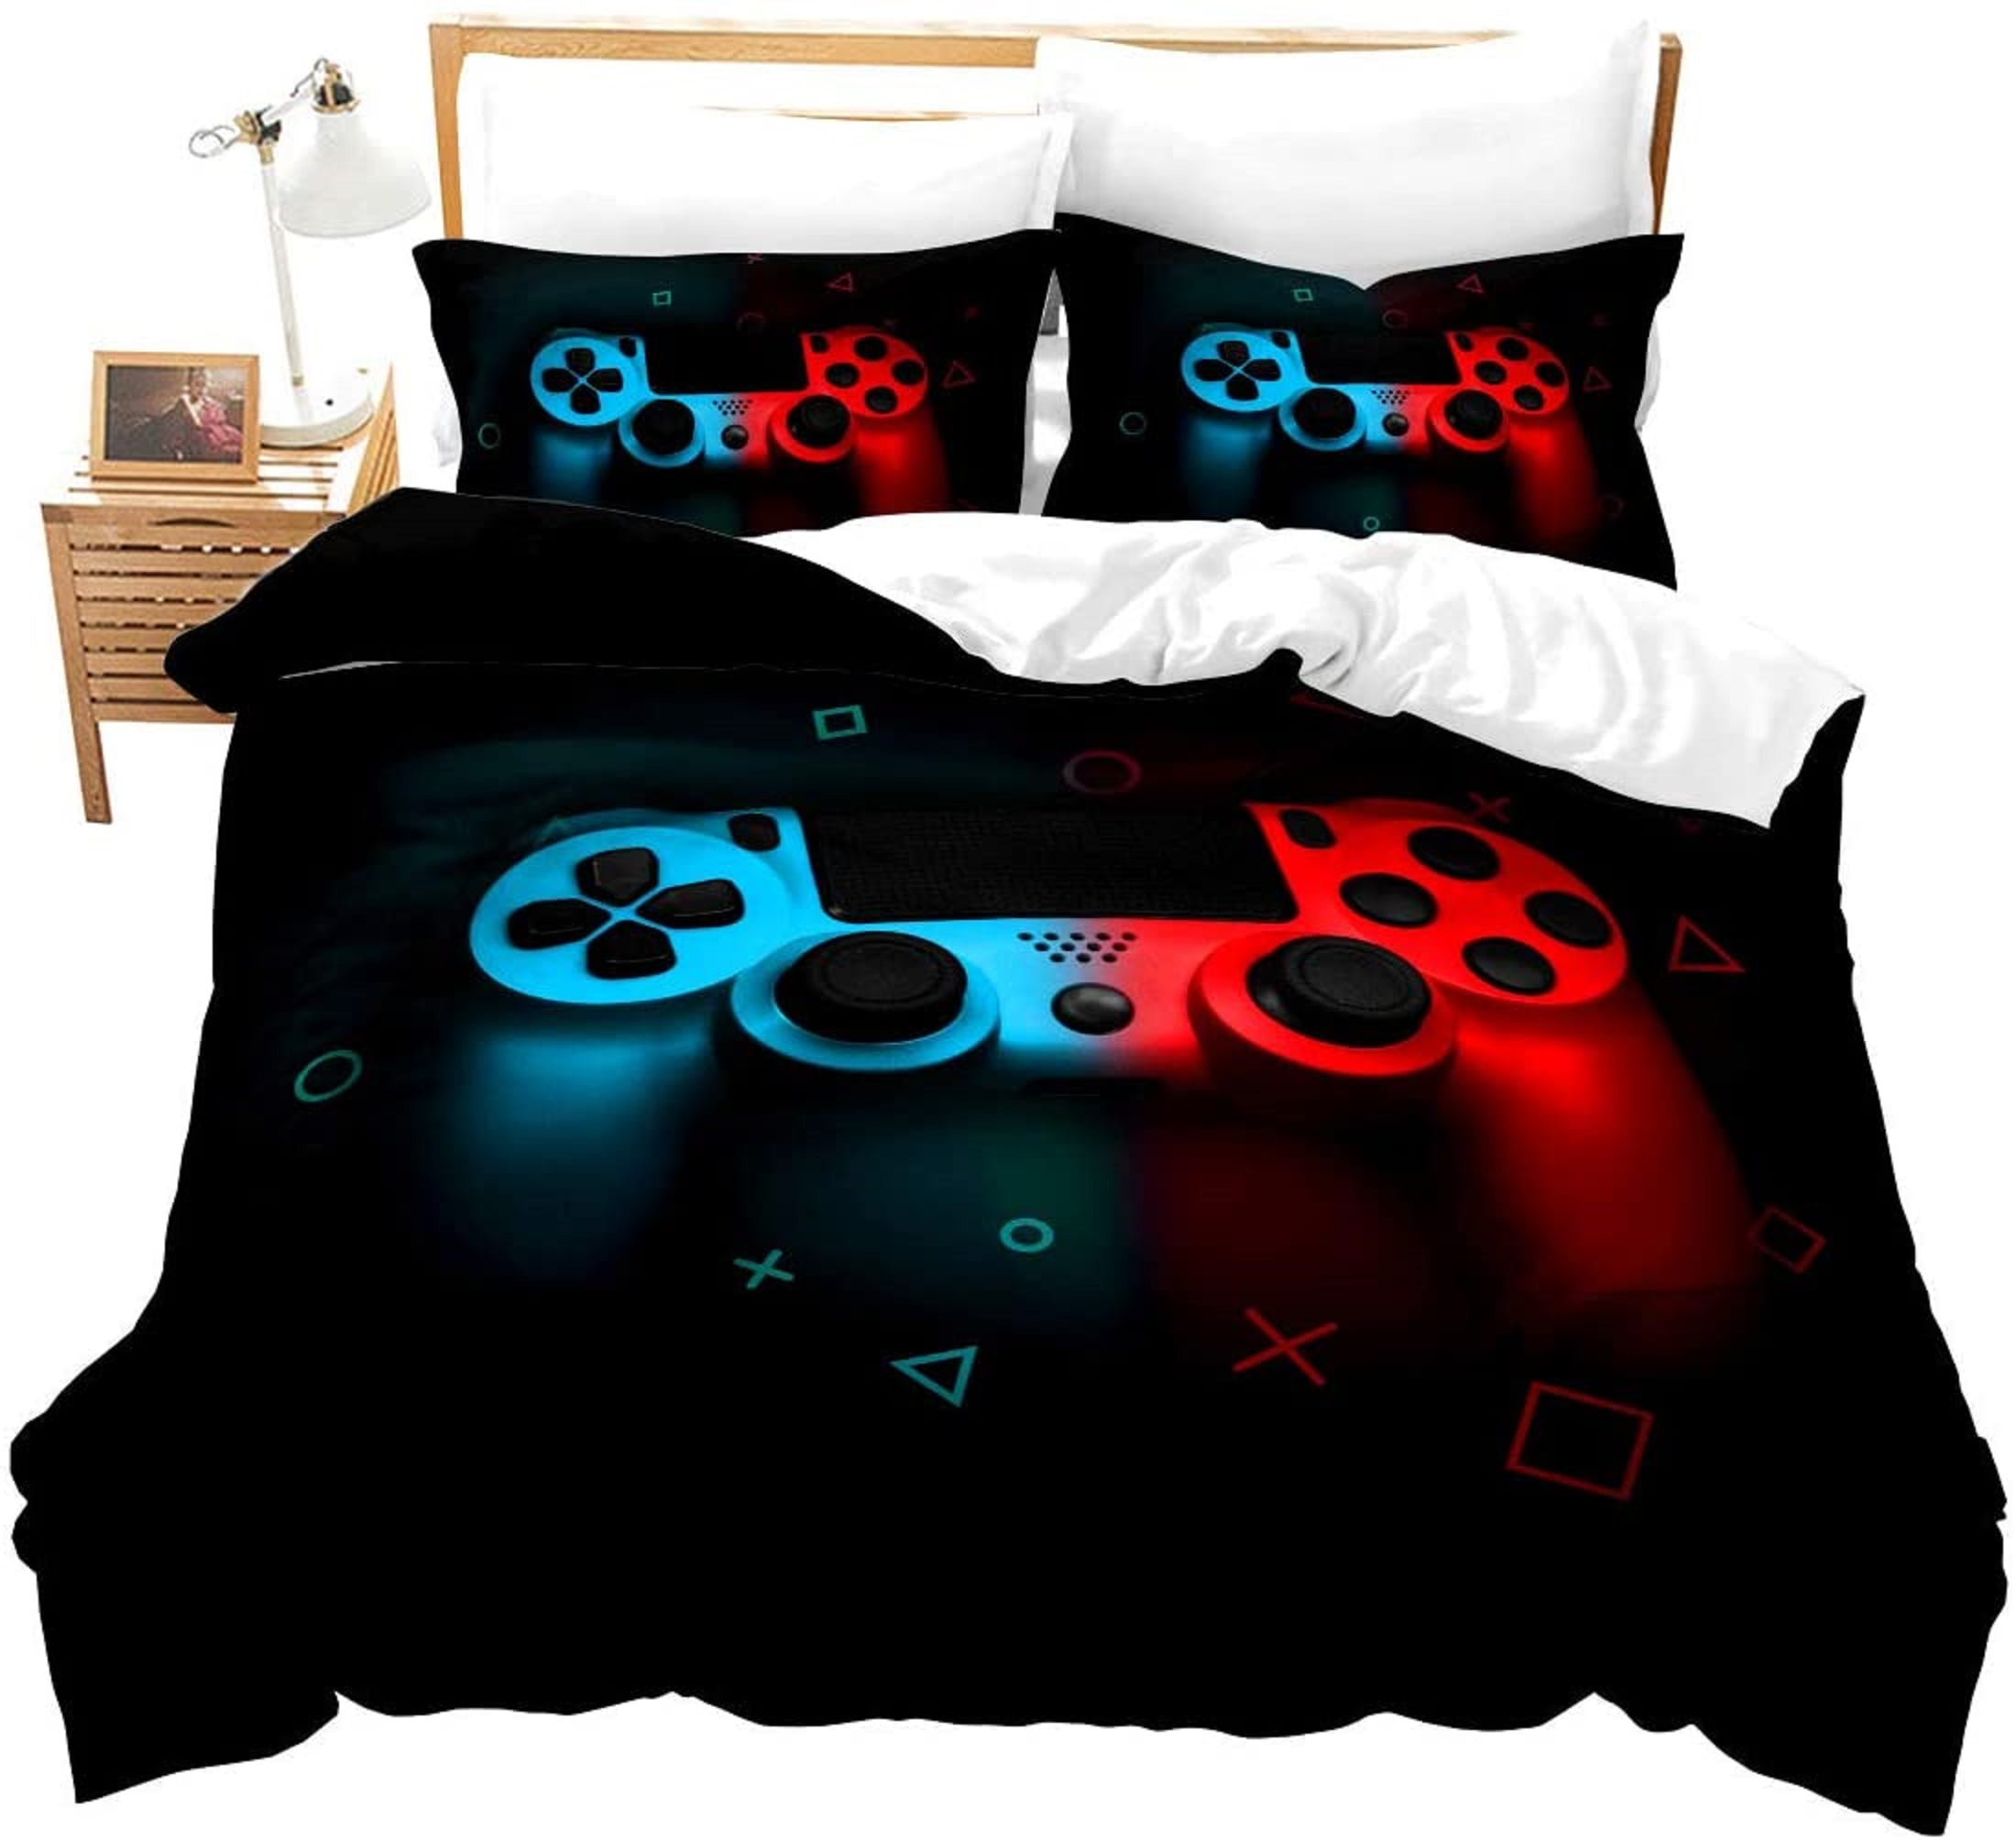 No Top Sheet Teens Gamepad Fitted Sheet Modern Gamer Fitted Bed Sheet Queen Size For Kid Boy Children Video Game Bedding Set Player Gaming Joystick Bedding Decor Set Breathable Decorative Room 